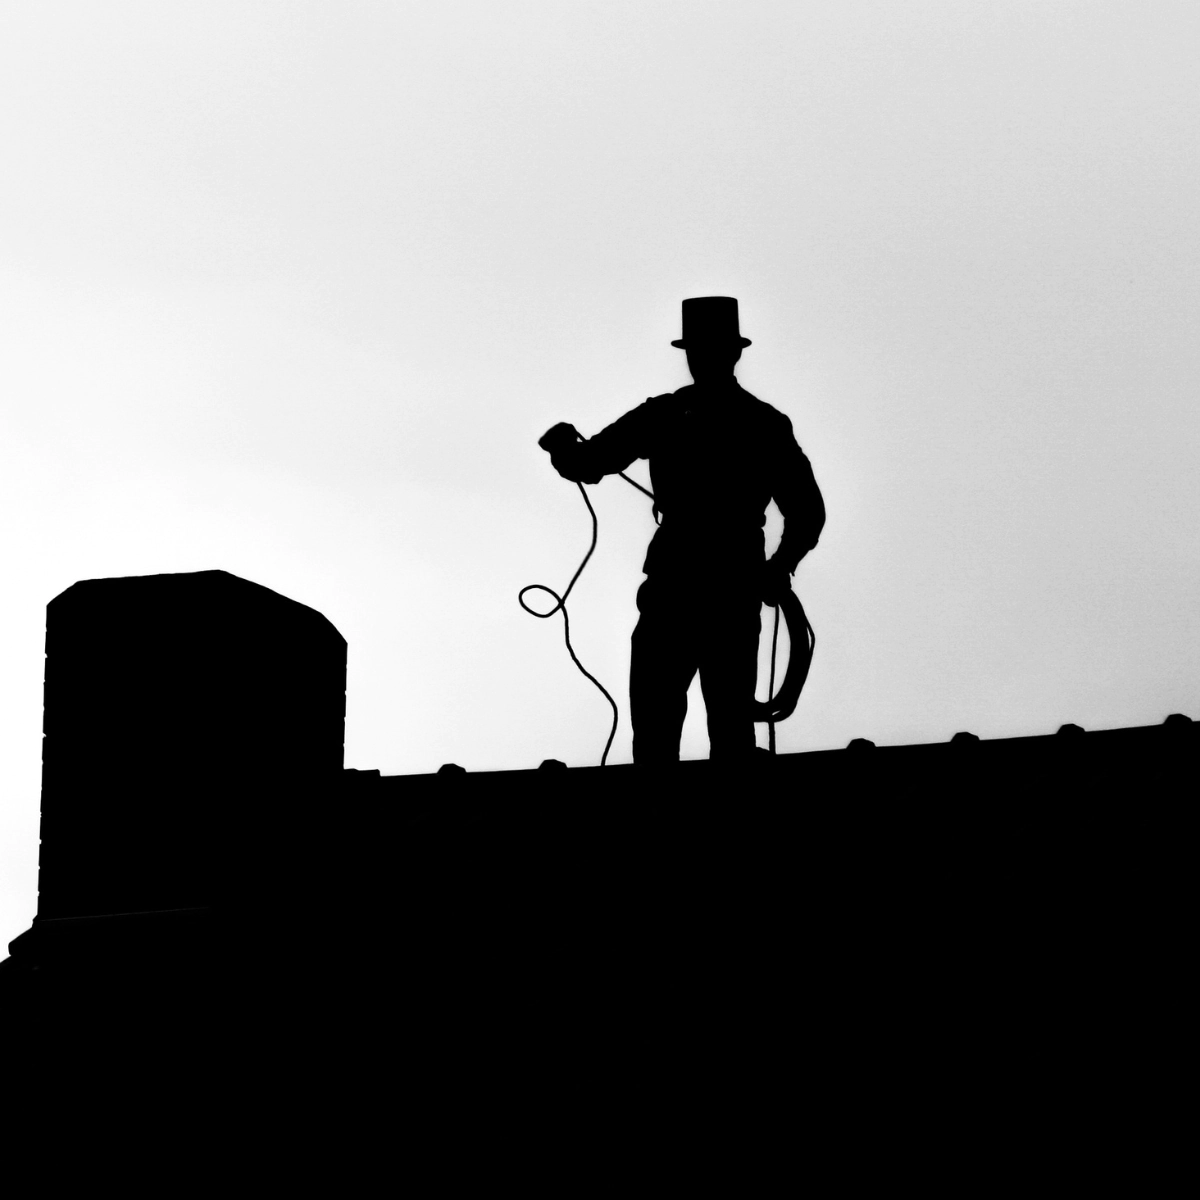 the sillhouette of a man standing on the roof of a house